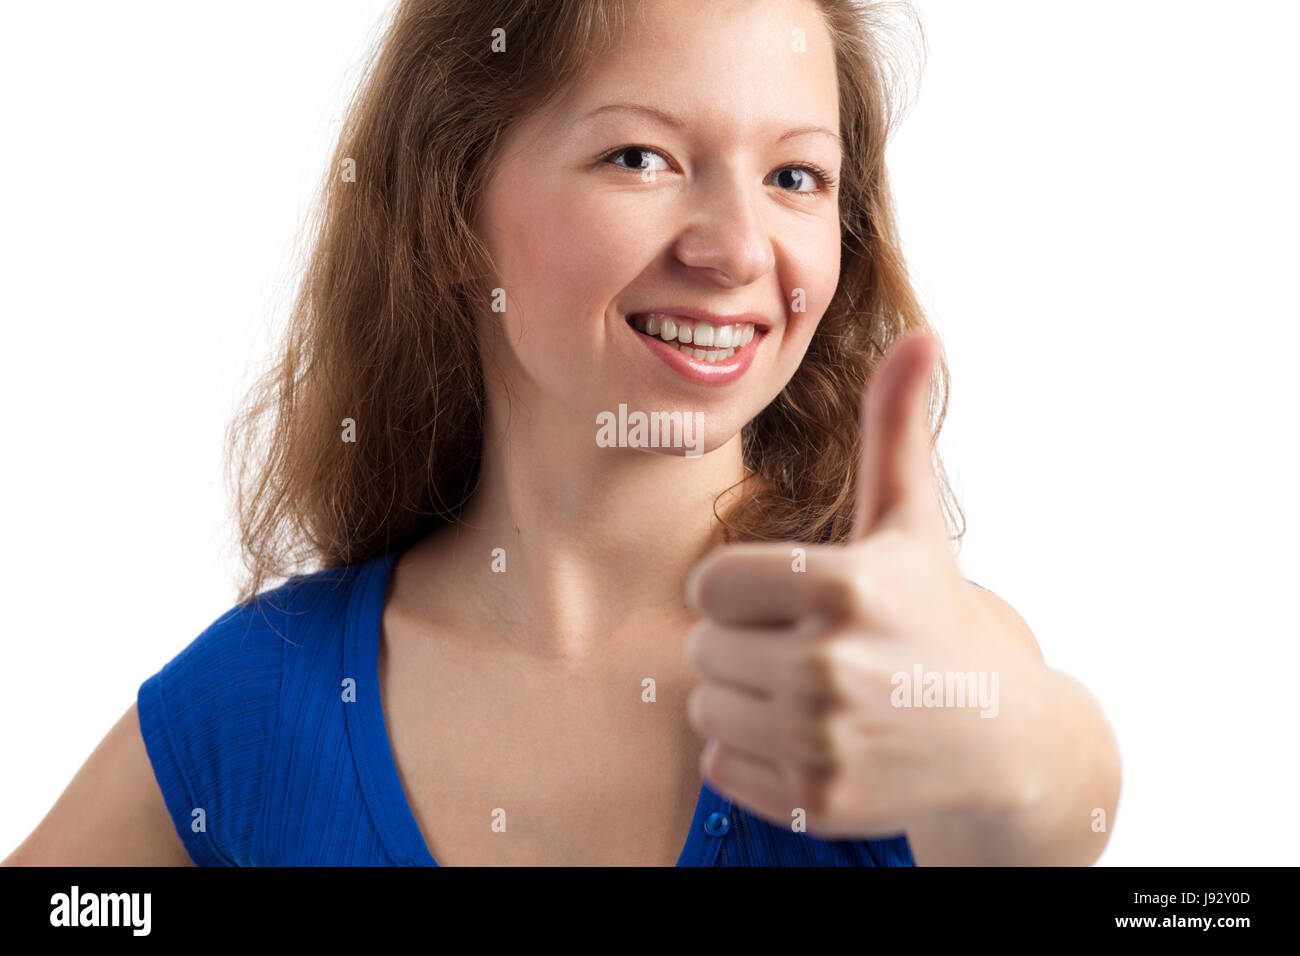 friendly smiling young woman with thumbs up Stock Photo